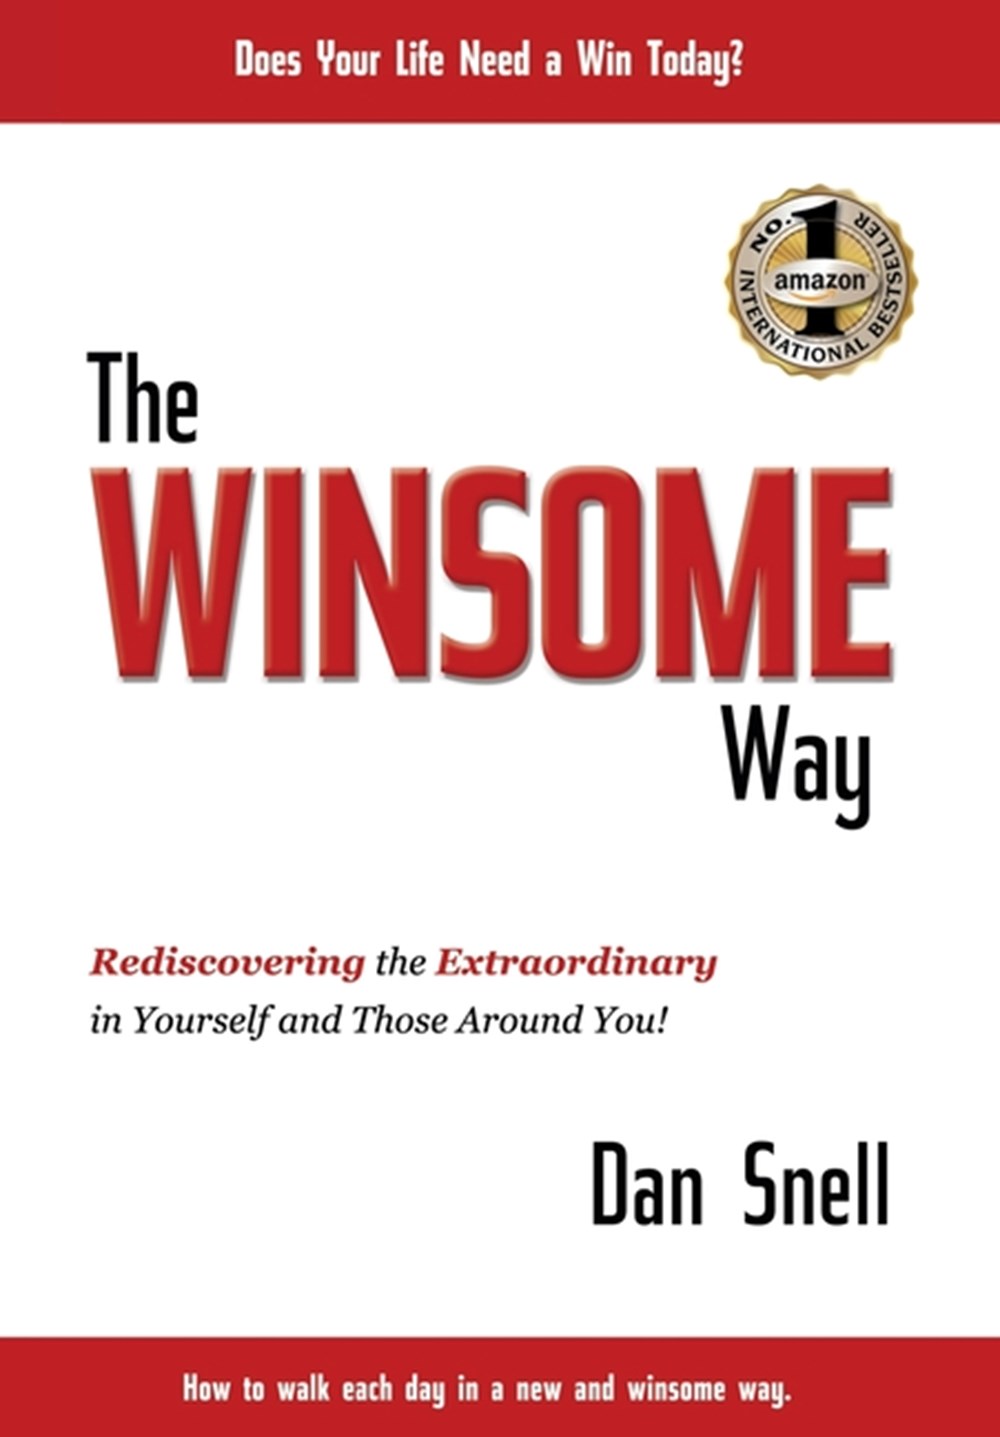 Winsome Way Rediscovering the Extraordinary in Yourself and Those Around You!